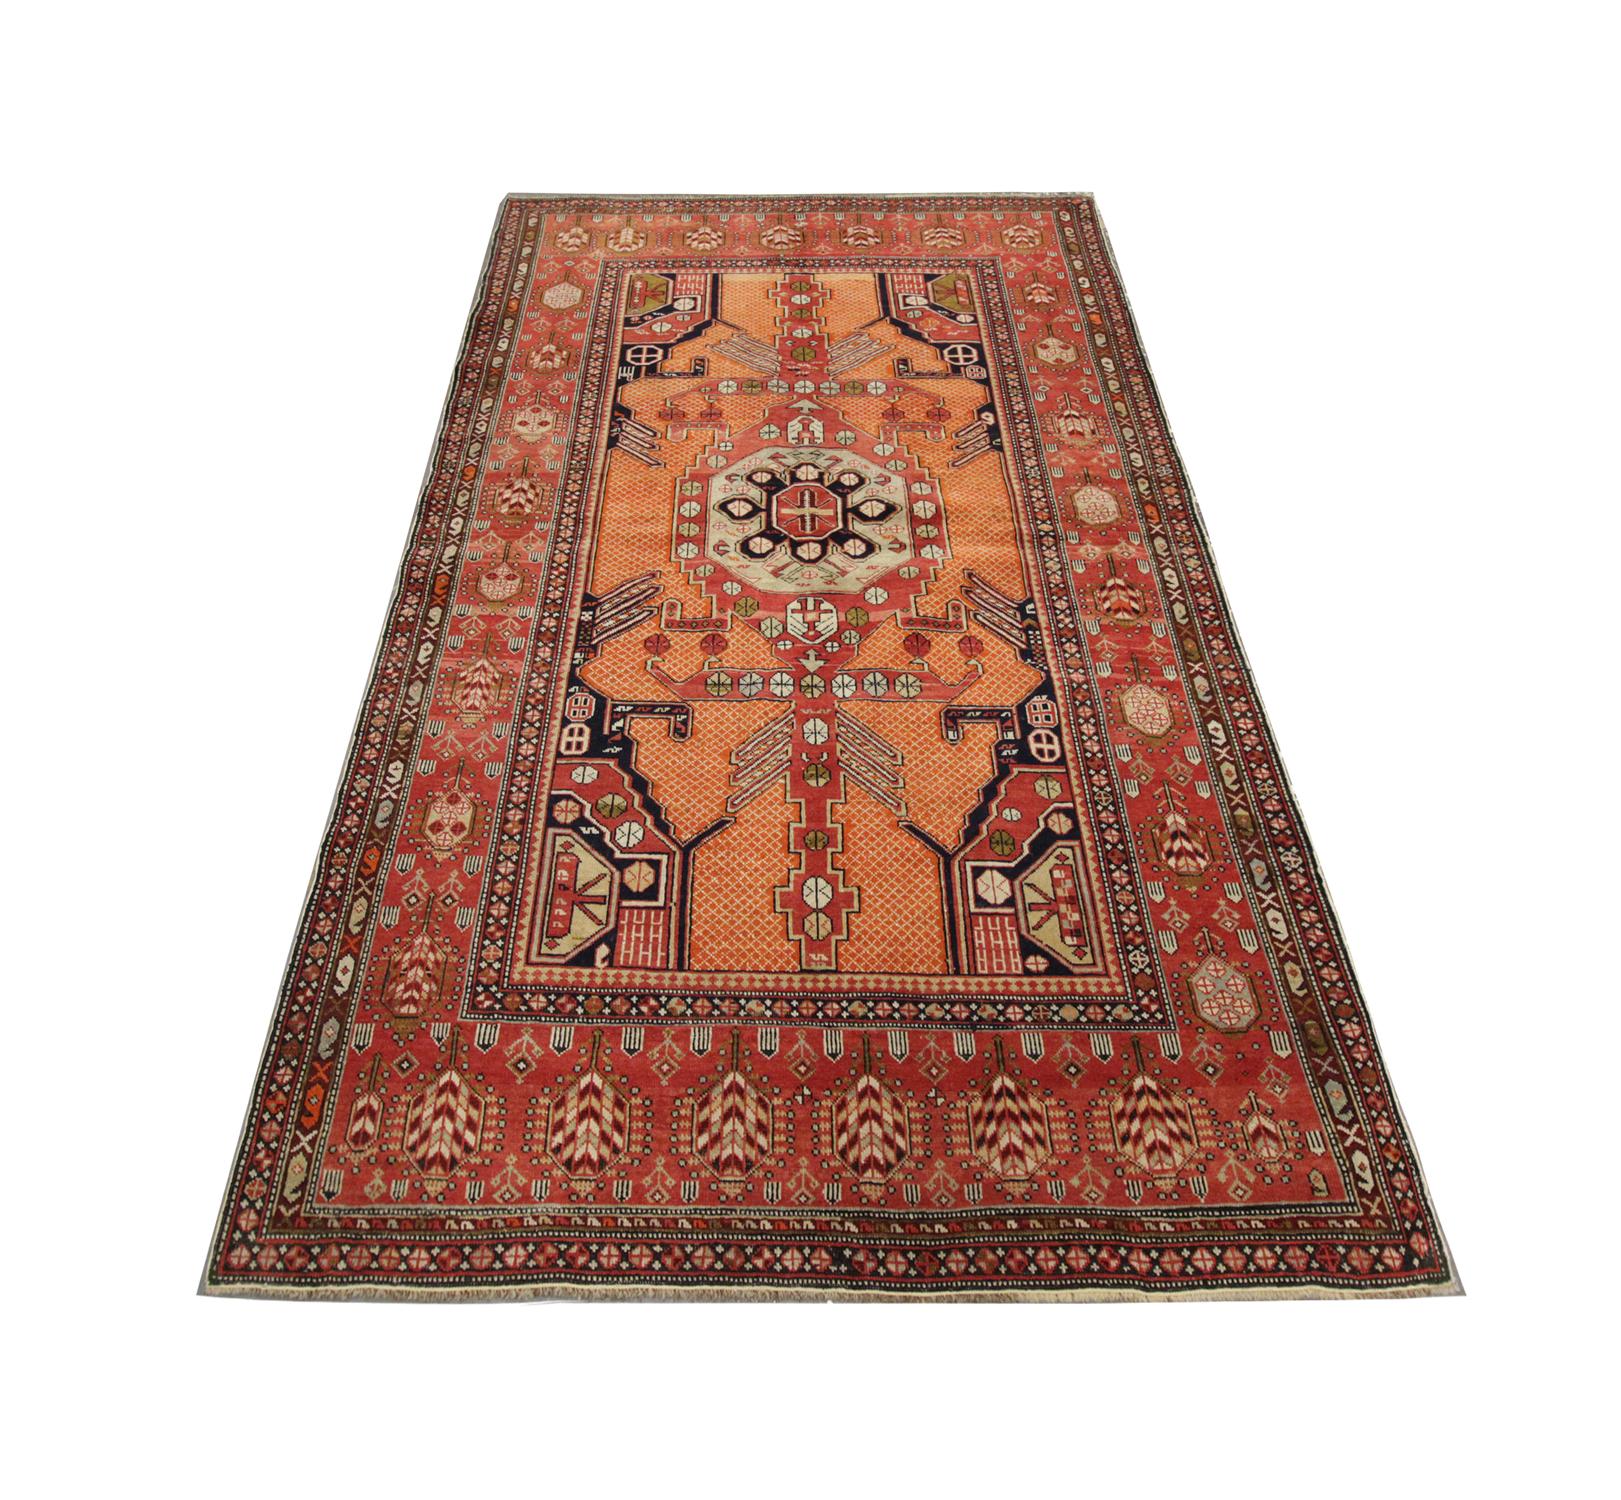 Light up your interior floors with this high-quality antique Caucasian rug from Shirvan, with a central medallion design- handwoven in 1920 with hand-spun, vegetable-dyed wool, and cotton, by some of the finest artisans. Perfect for both modern or